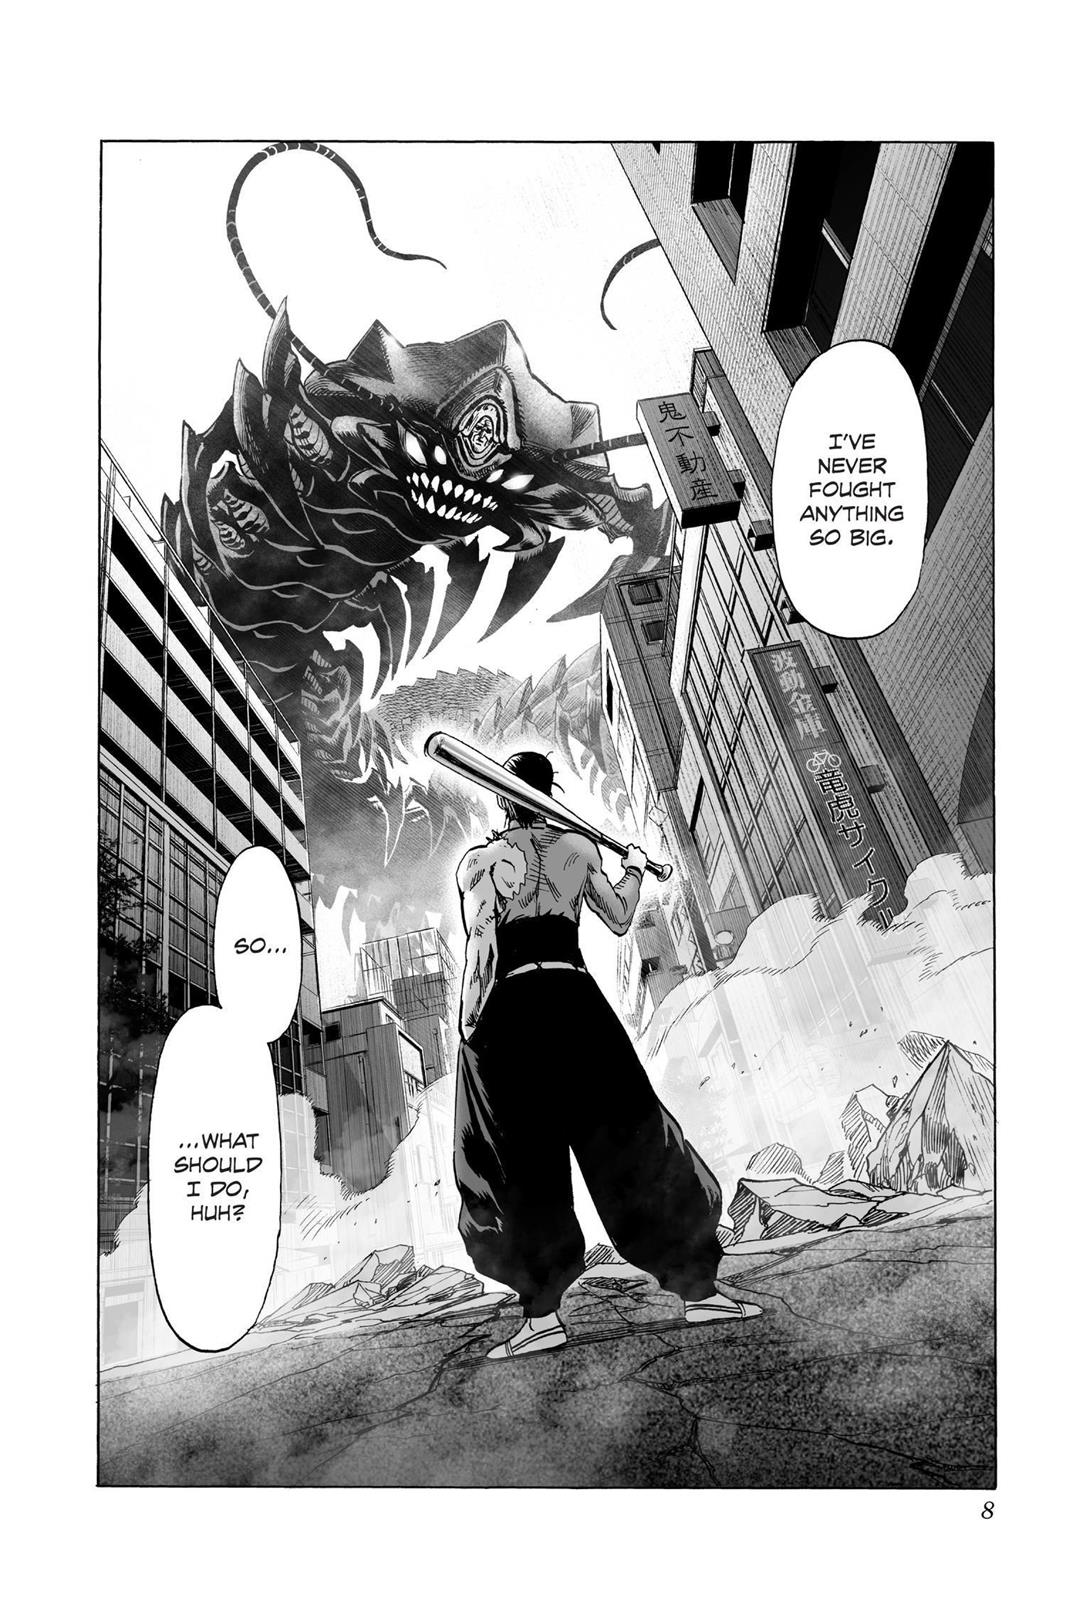 One-Punch Man, Punch 56 image 08